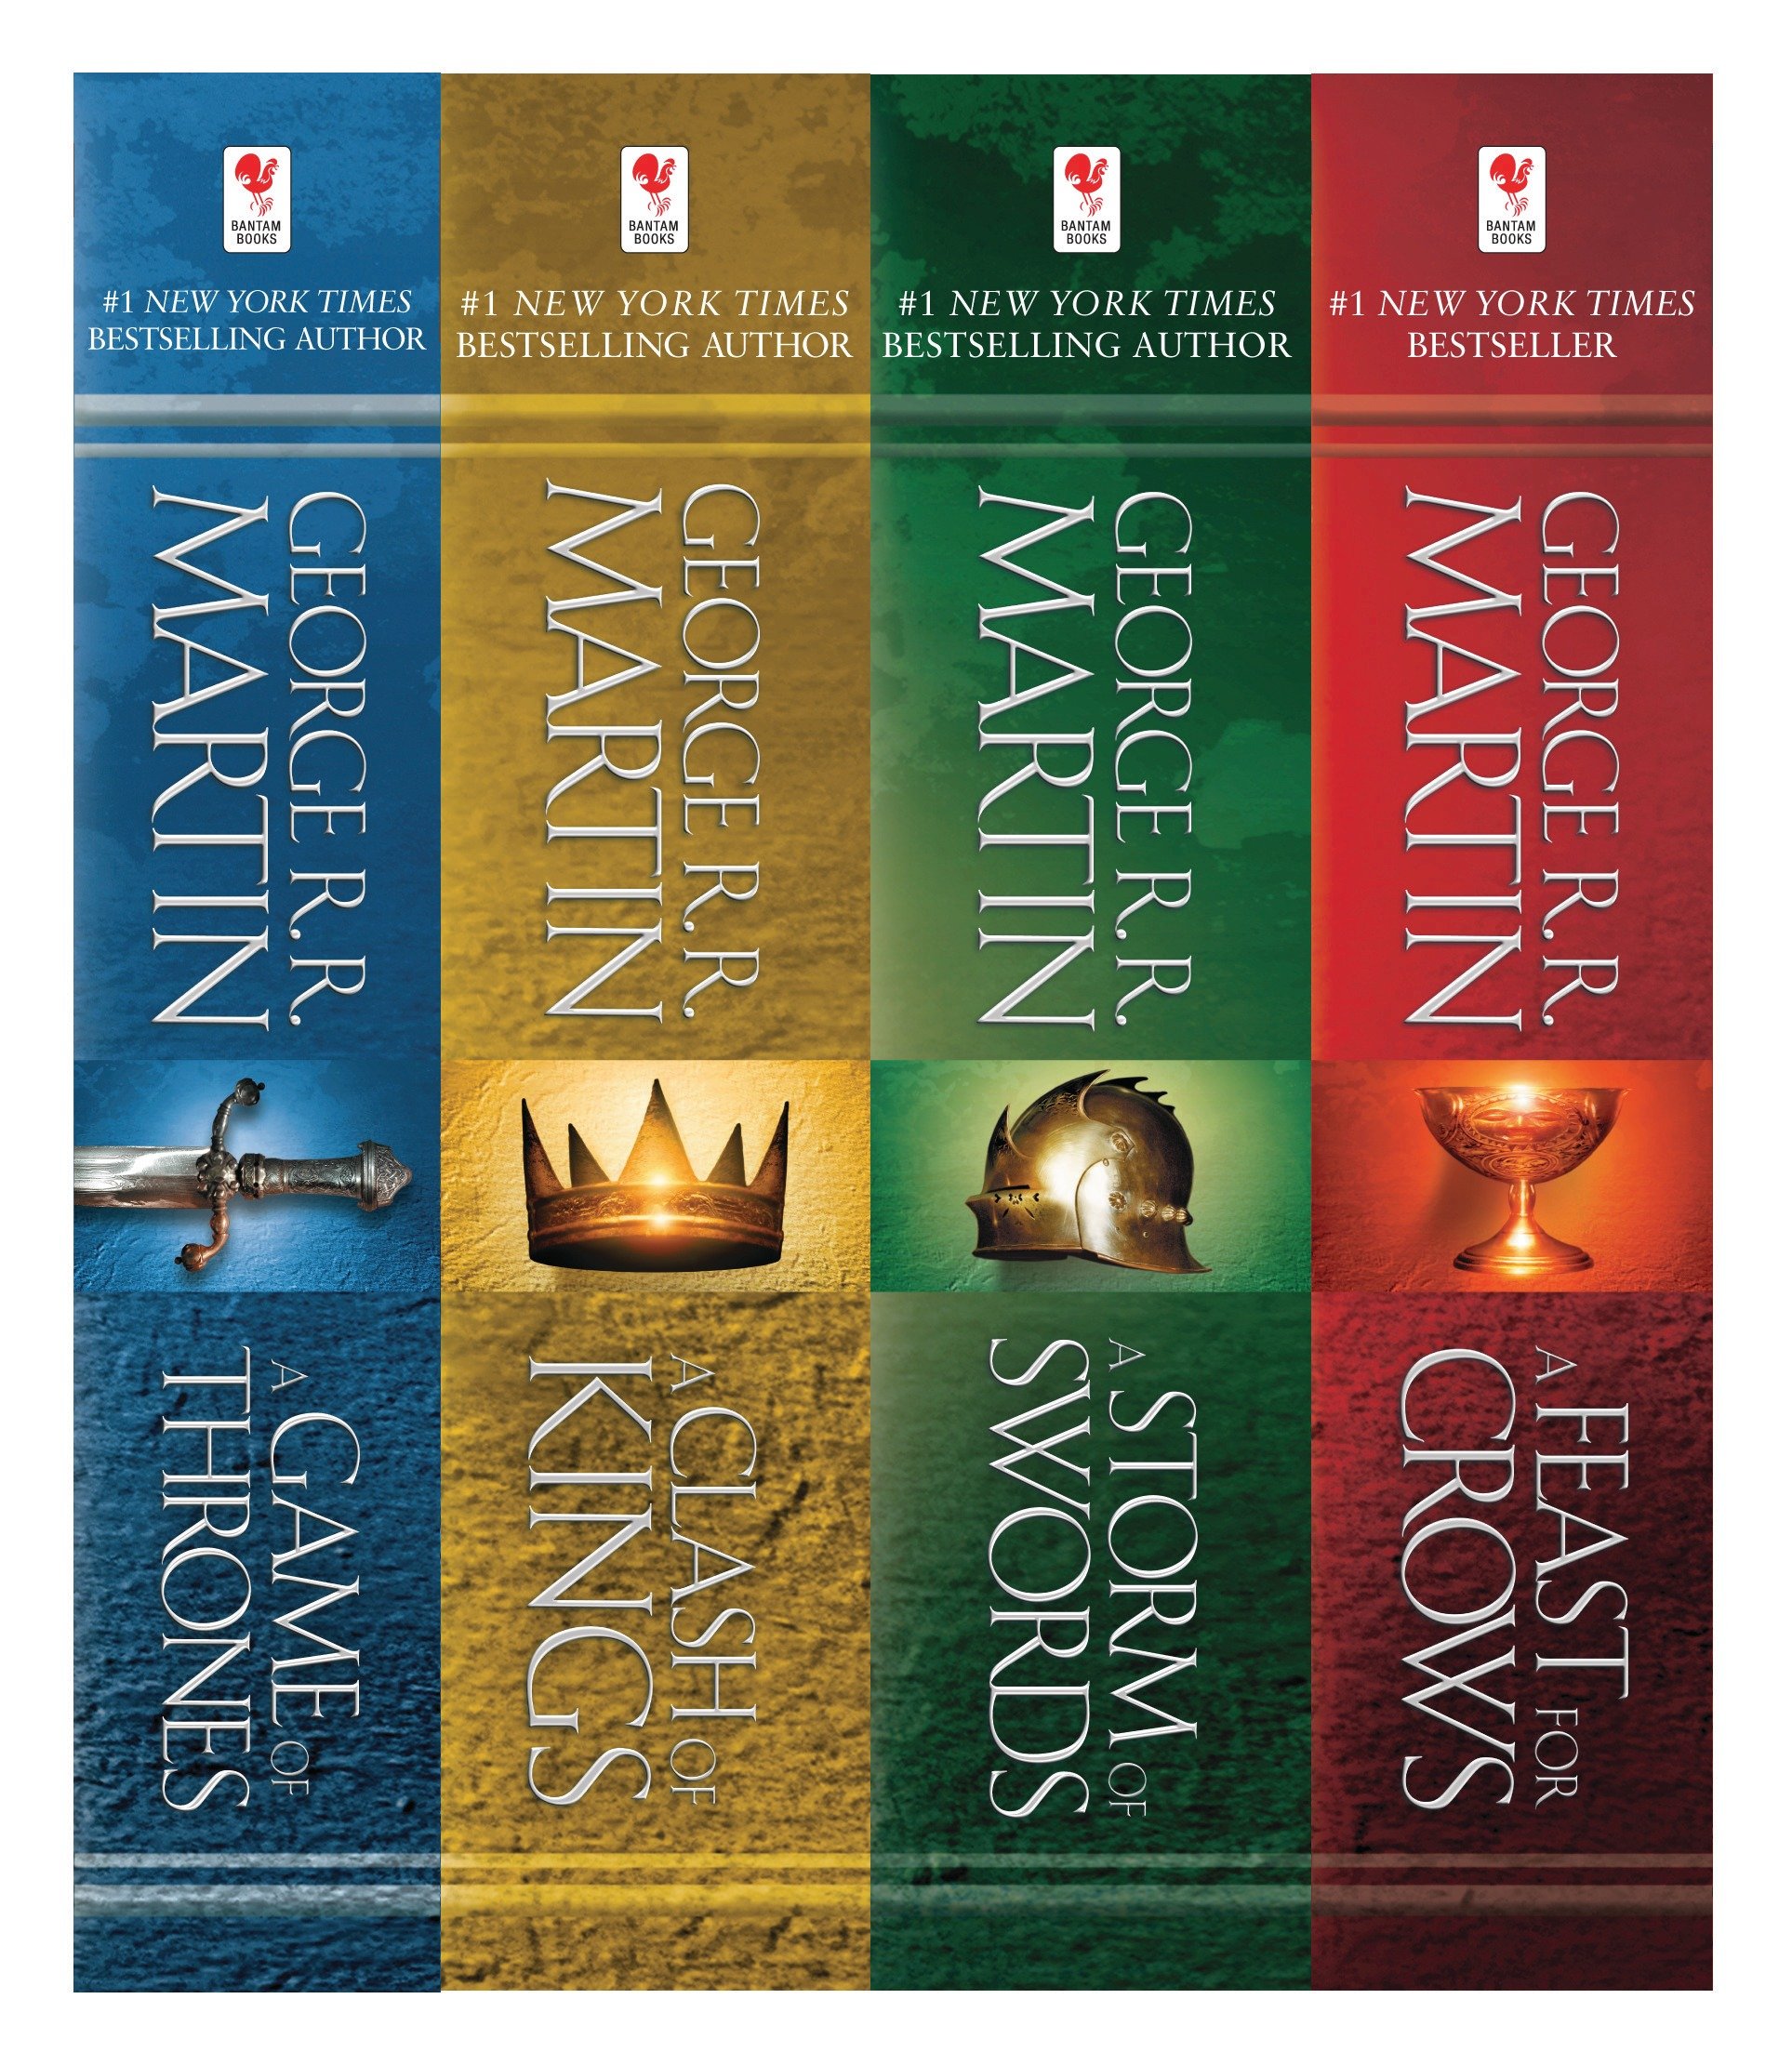 Umschlagbild für A Game of Thrones 4-Book Bundle [electronic resource] : A Song of Ice and Fire Series: A Game of Thrones, A Clash of Kings, A Storm of Swords, and A Feast for Crows